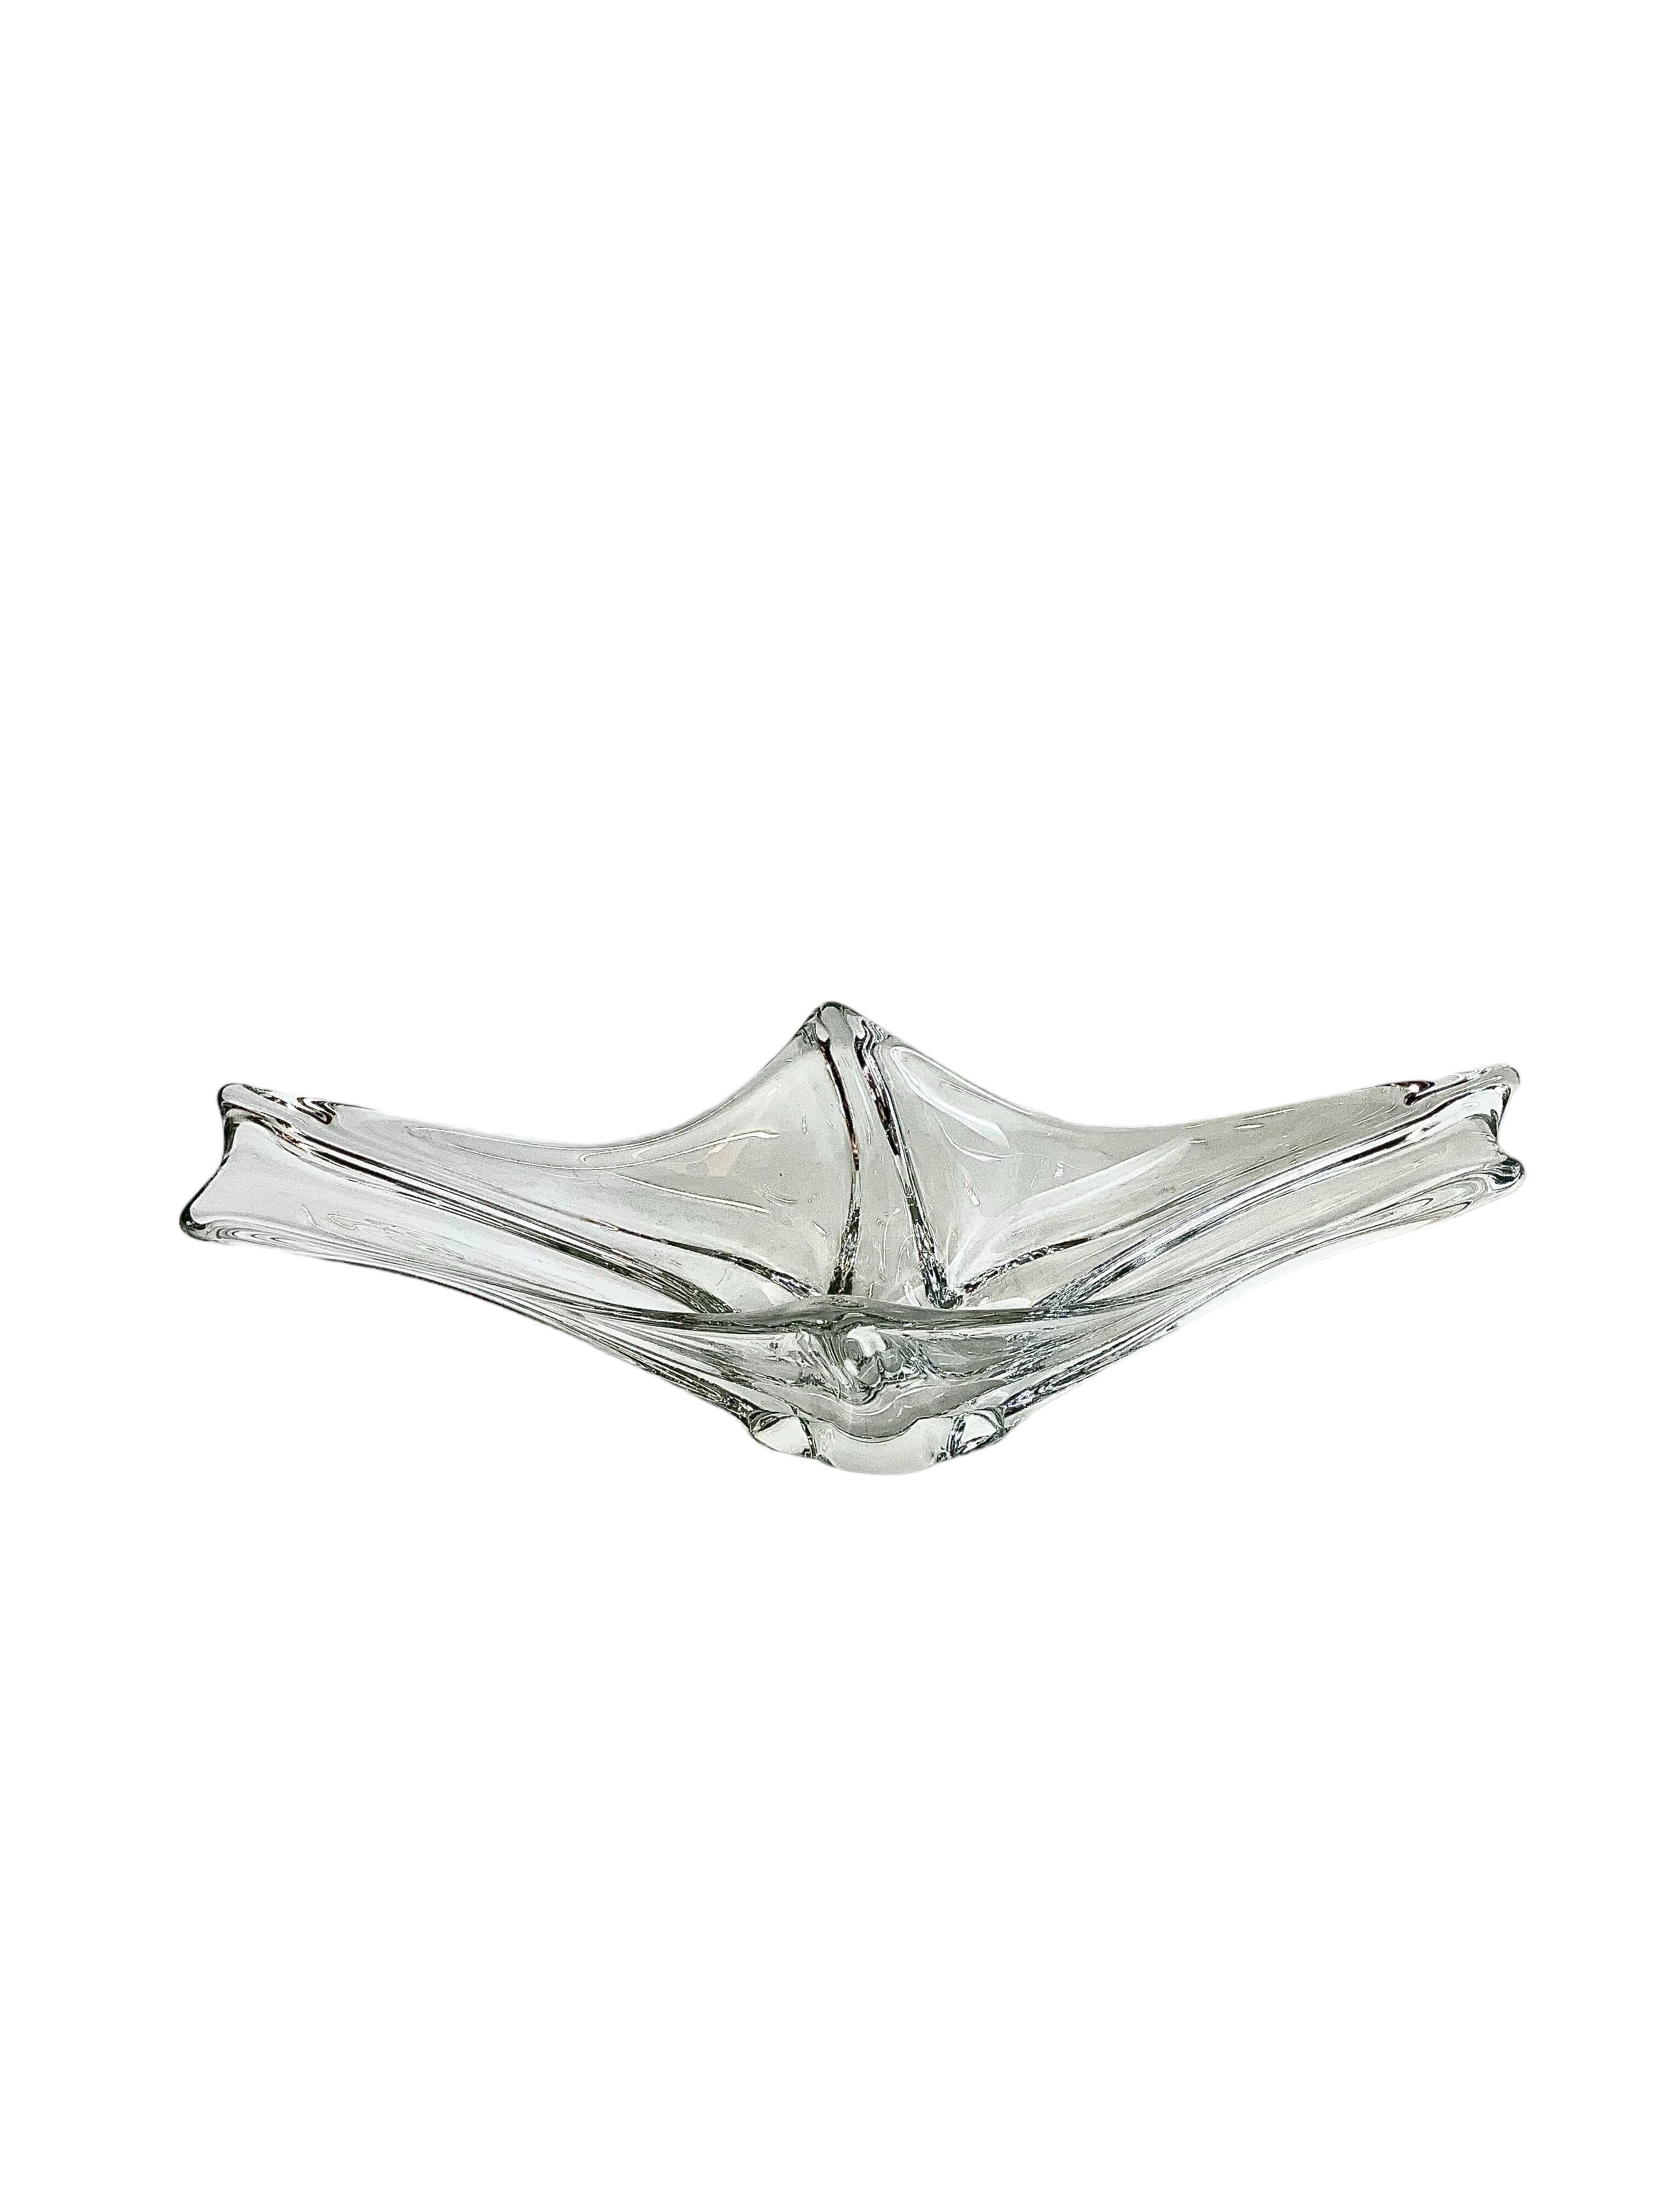 A spectacular Art Deco style crystal fruit dish, from the legendary French Daum cristallerie. Constructed in an undulating Freeform design, this wonderful, heavy, vintage piece is in excellent condition, and would make a marvellous table centrepiece